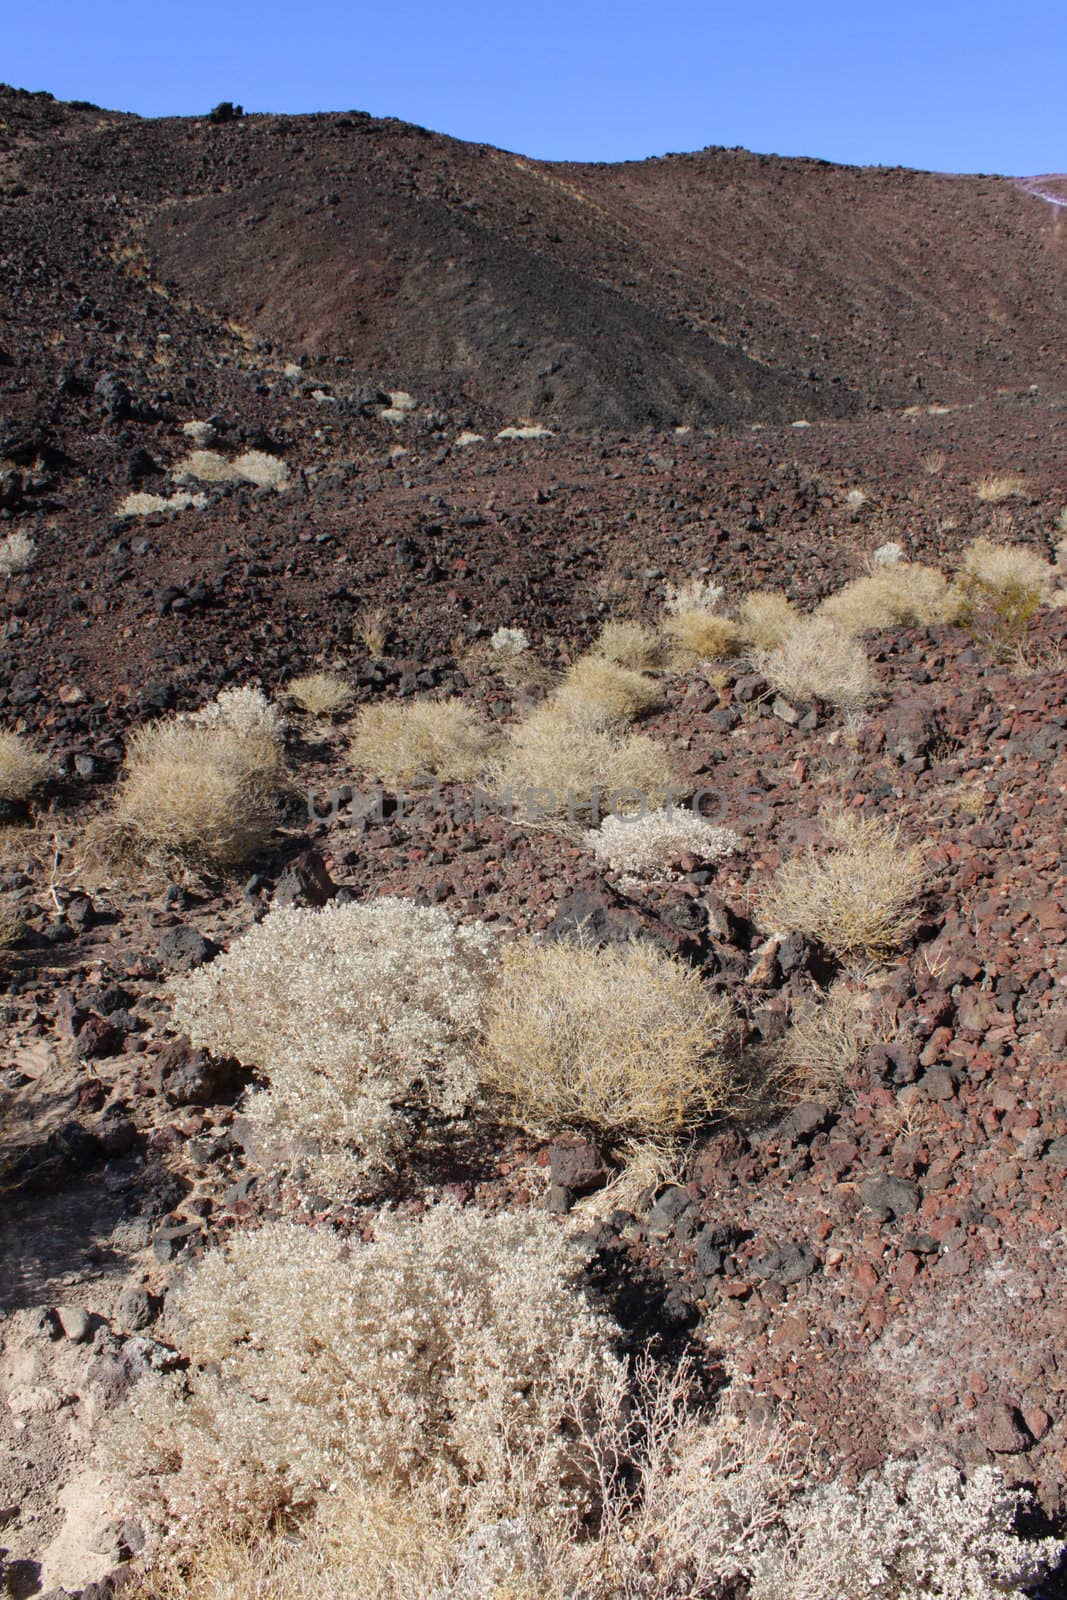 Volcanic rock scatters the center of Amboy Crater in the deserts of southern California.